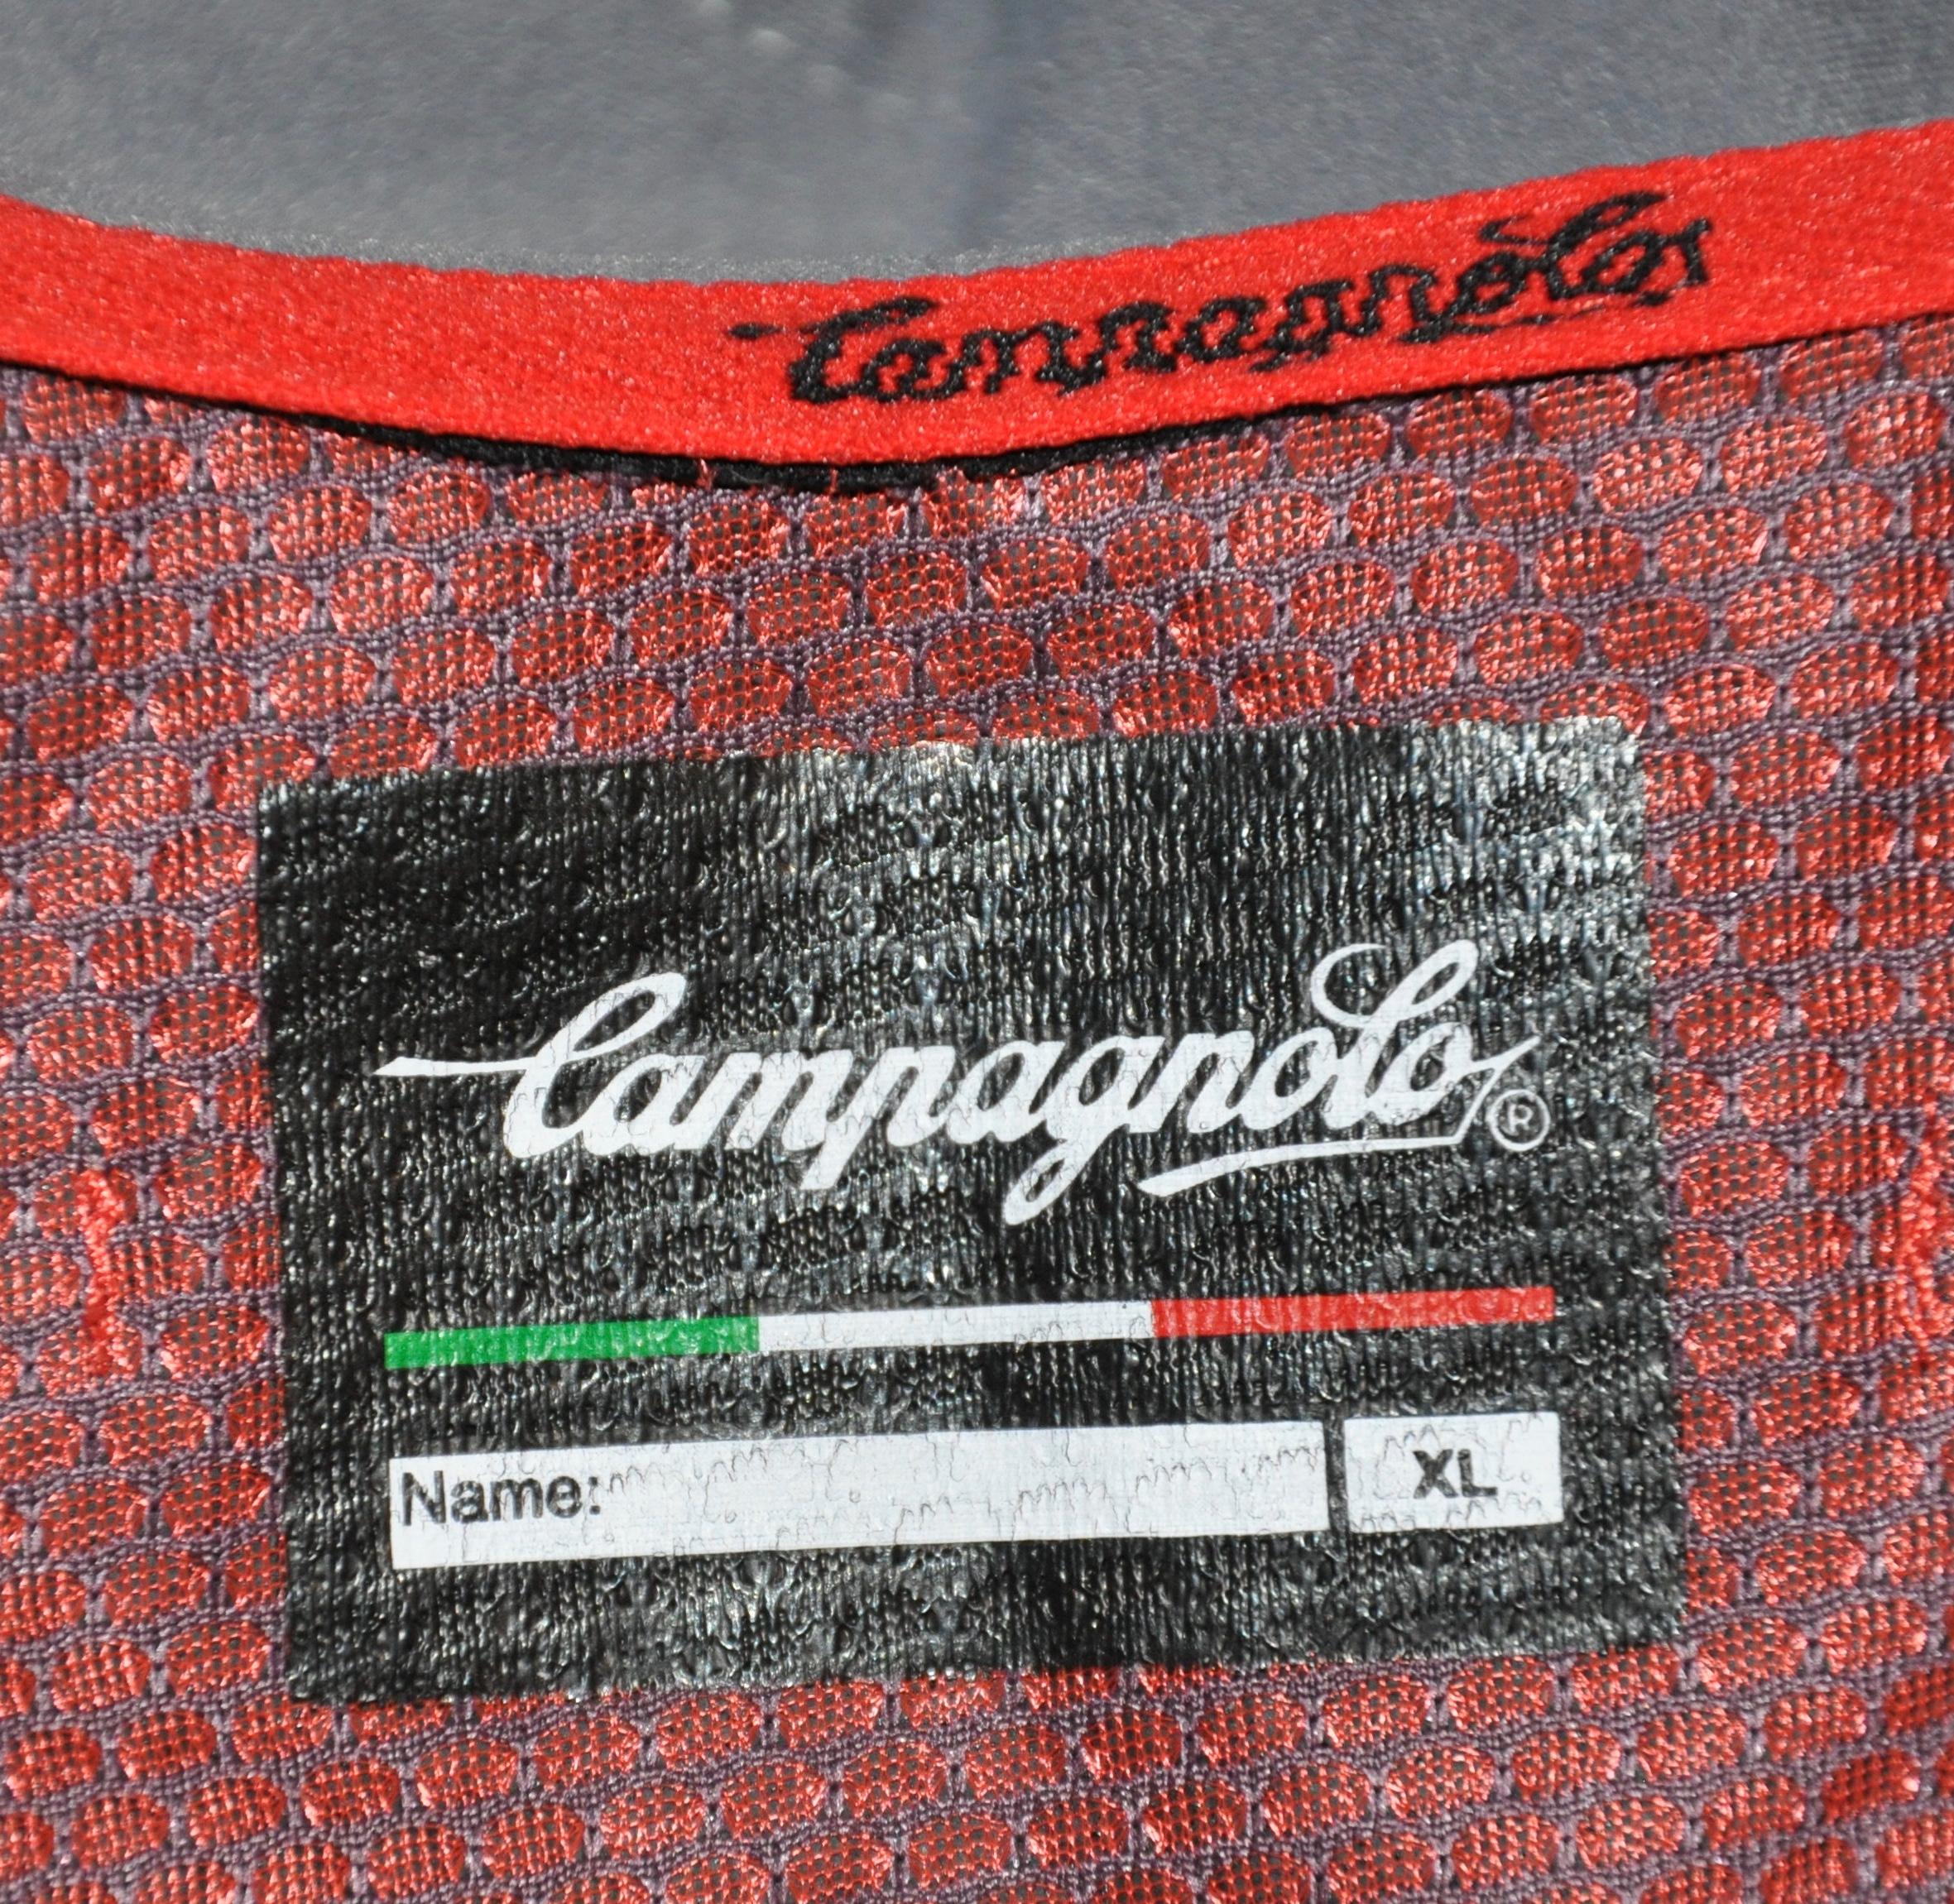 Campagnolo of Italy Tour du France Touring Bike Zipper Jacket 3